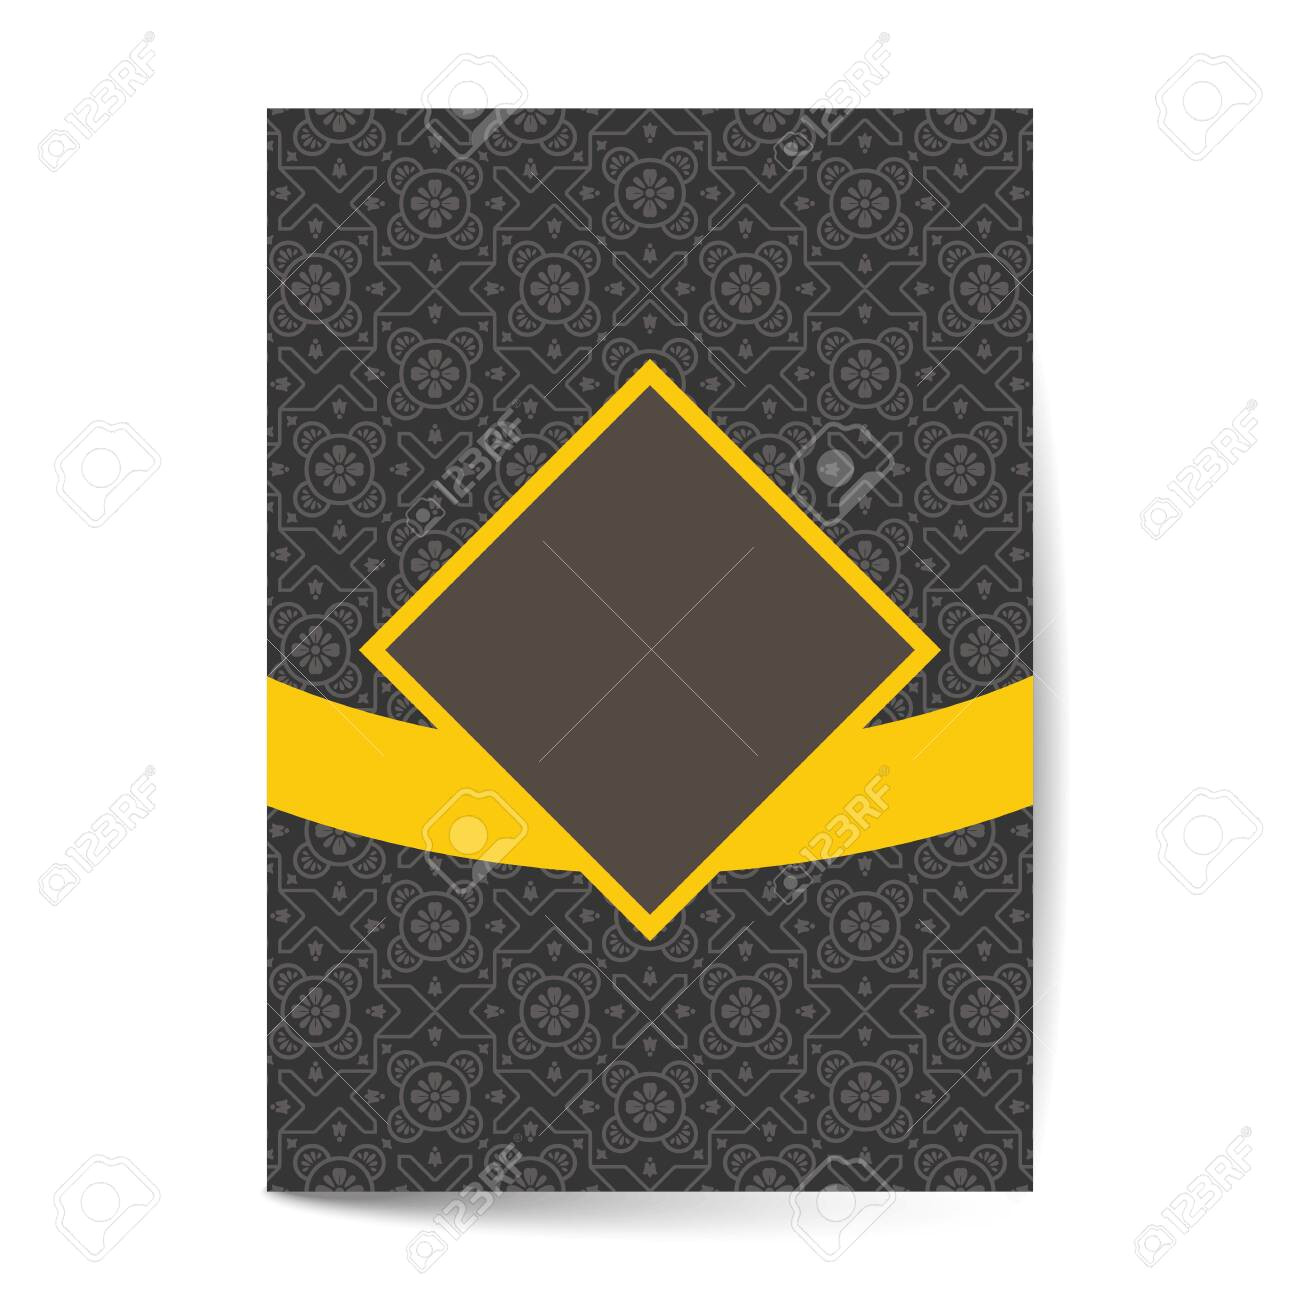 140119807 minimal luxury cover design with pattern element for menu invitation card banner book design vector jpg